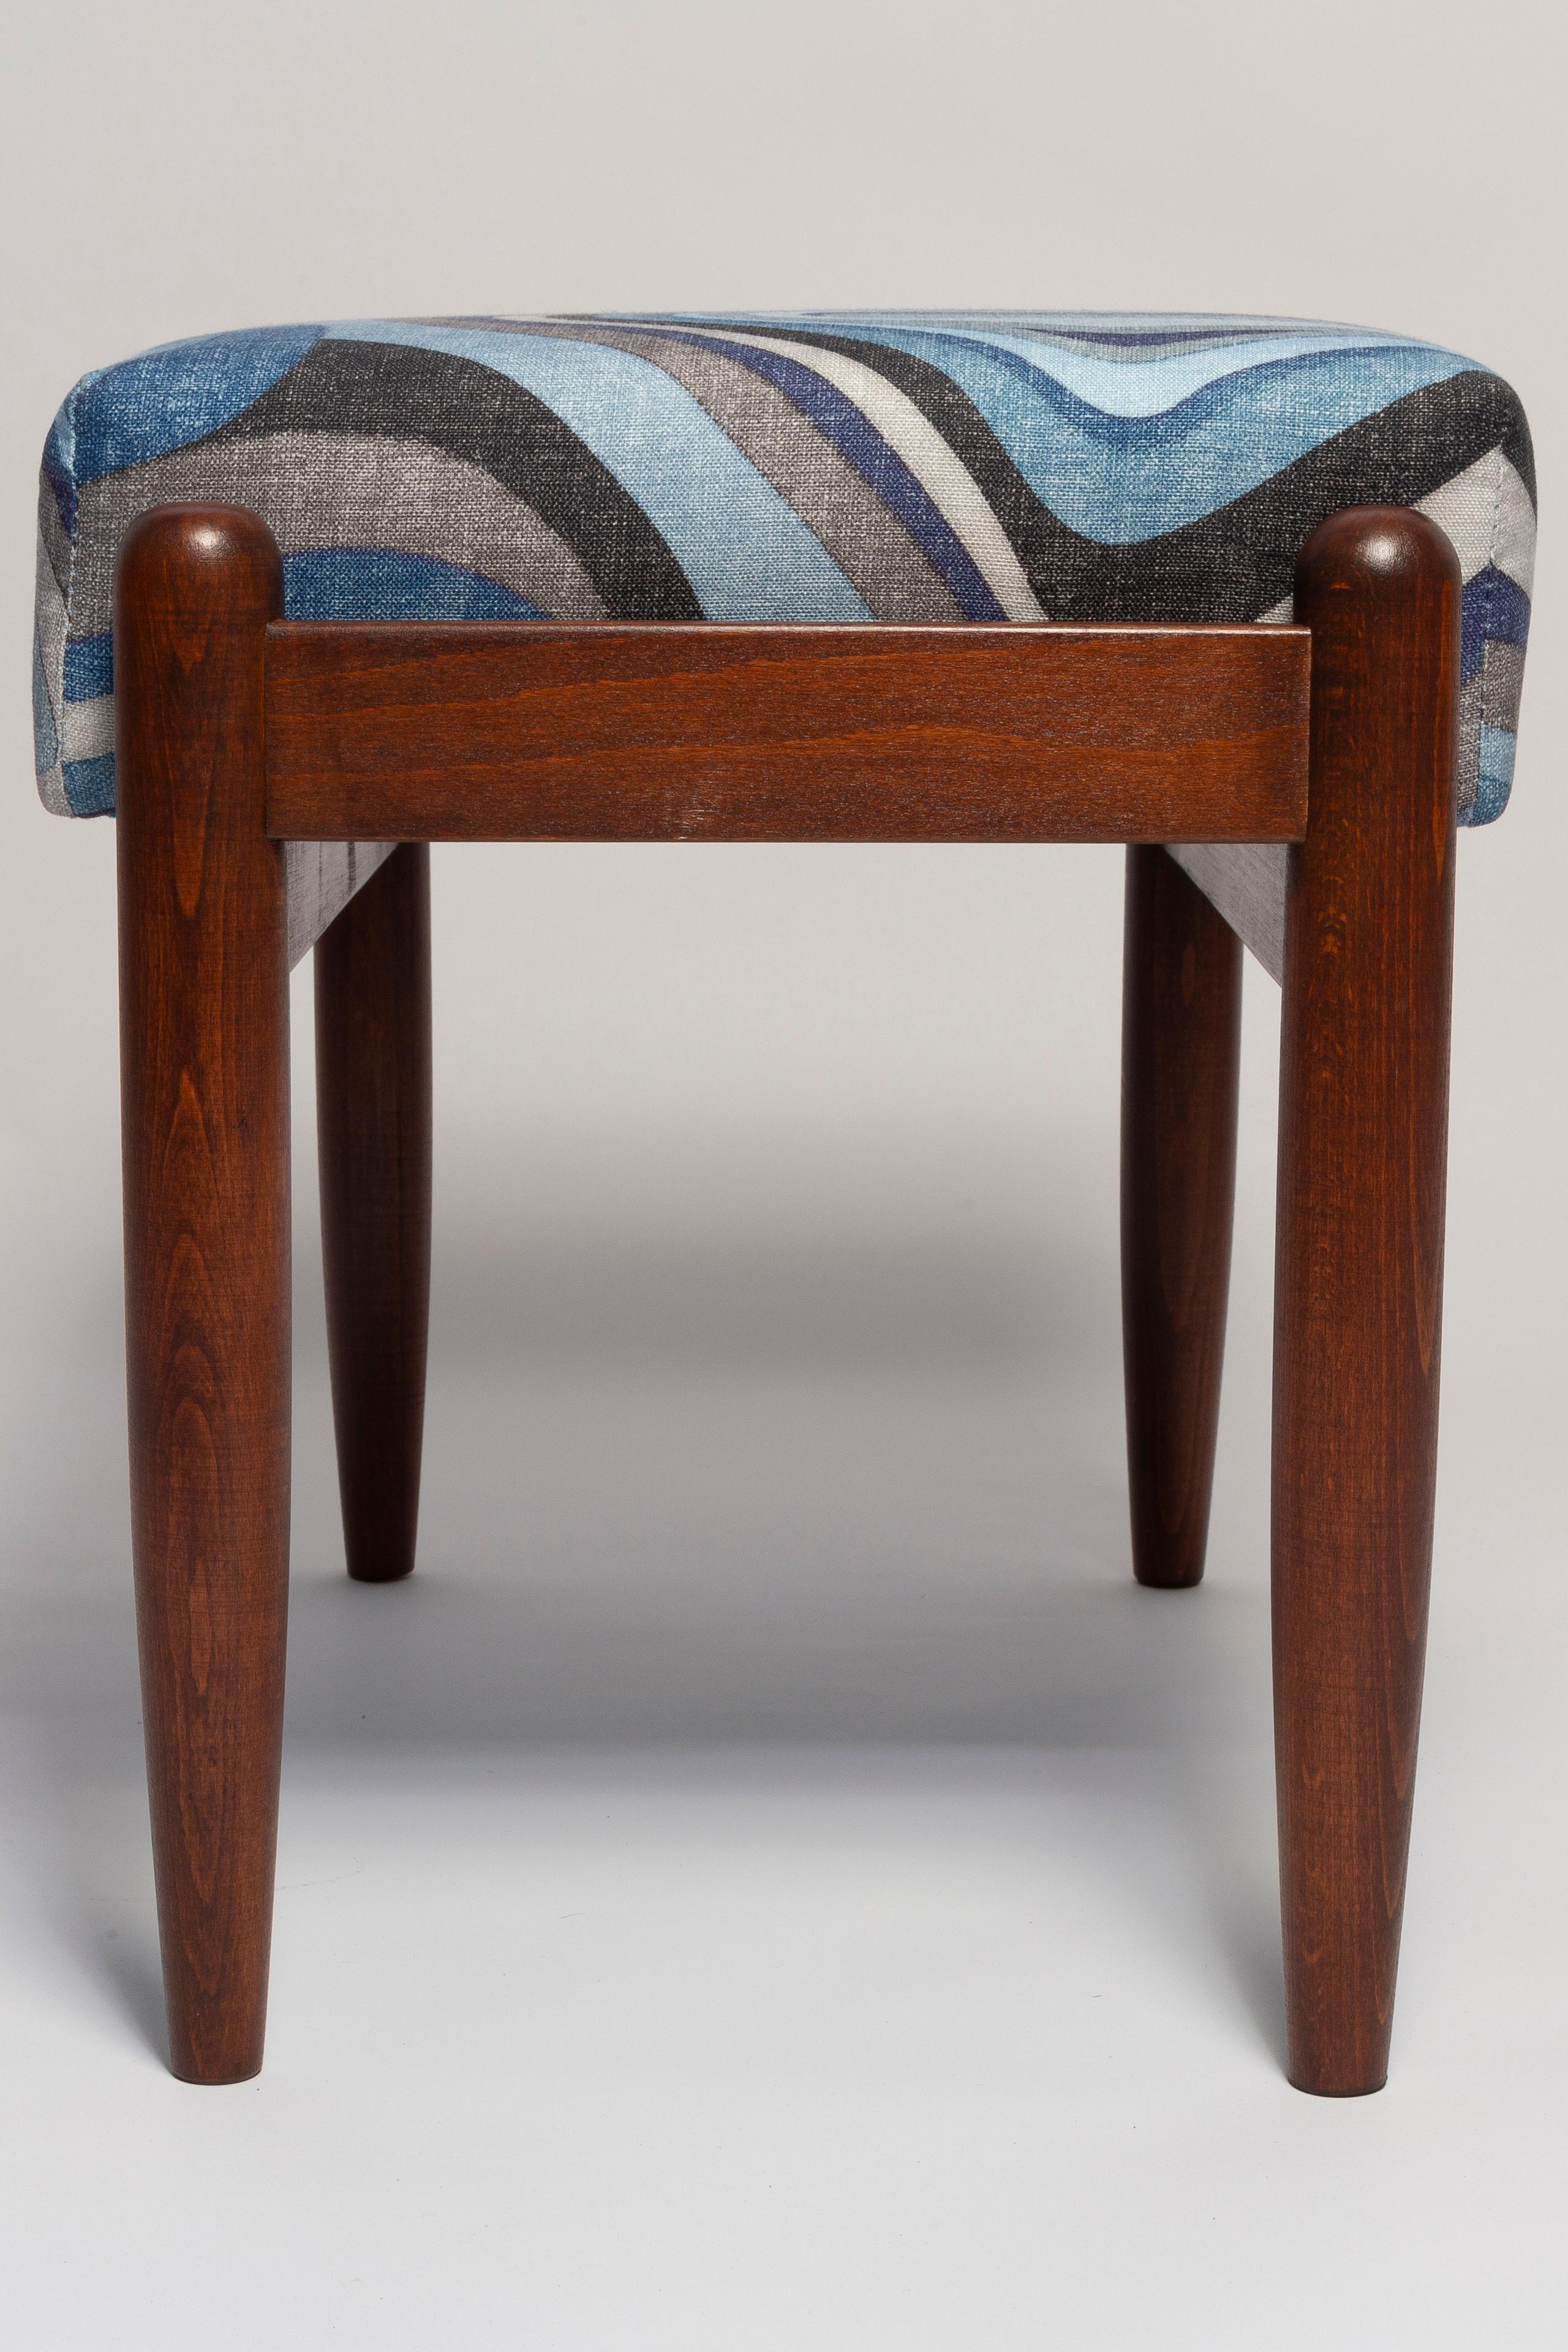 Hand-Crafted Set of Two Blue Linen Mid Century GFM Stools, Edmund Homa, Europe, 1960s For Sale